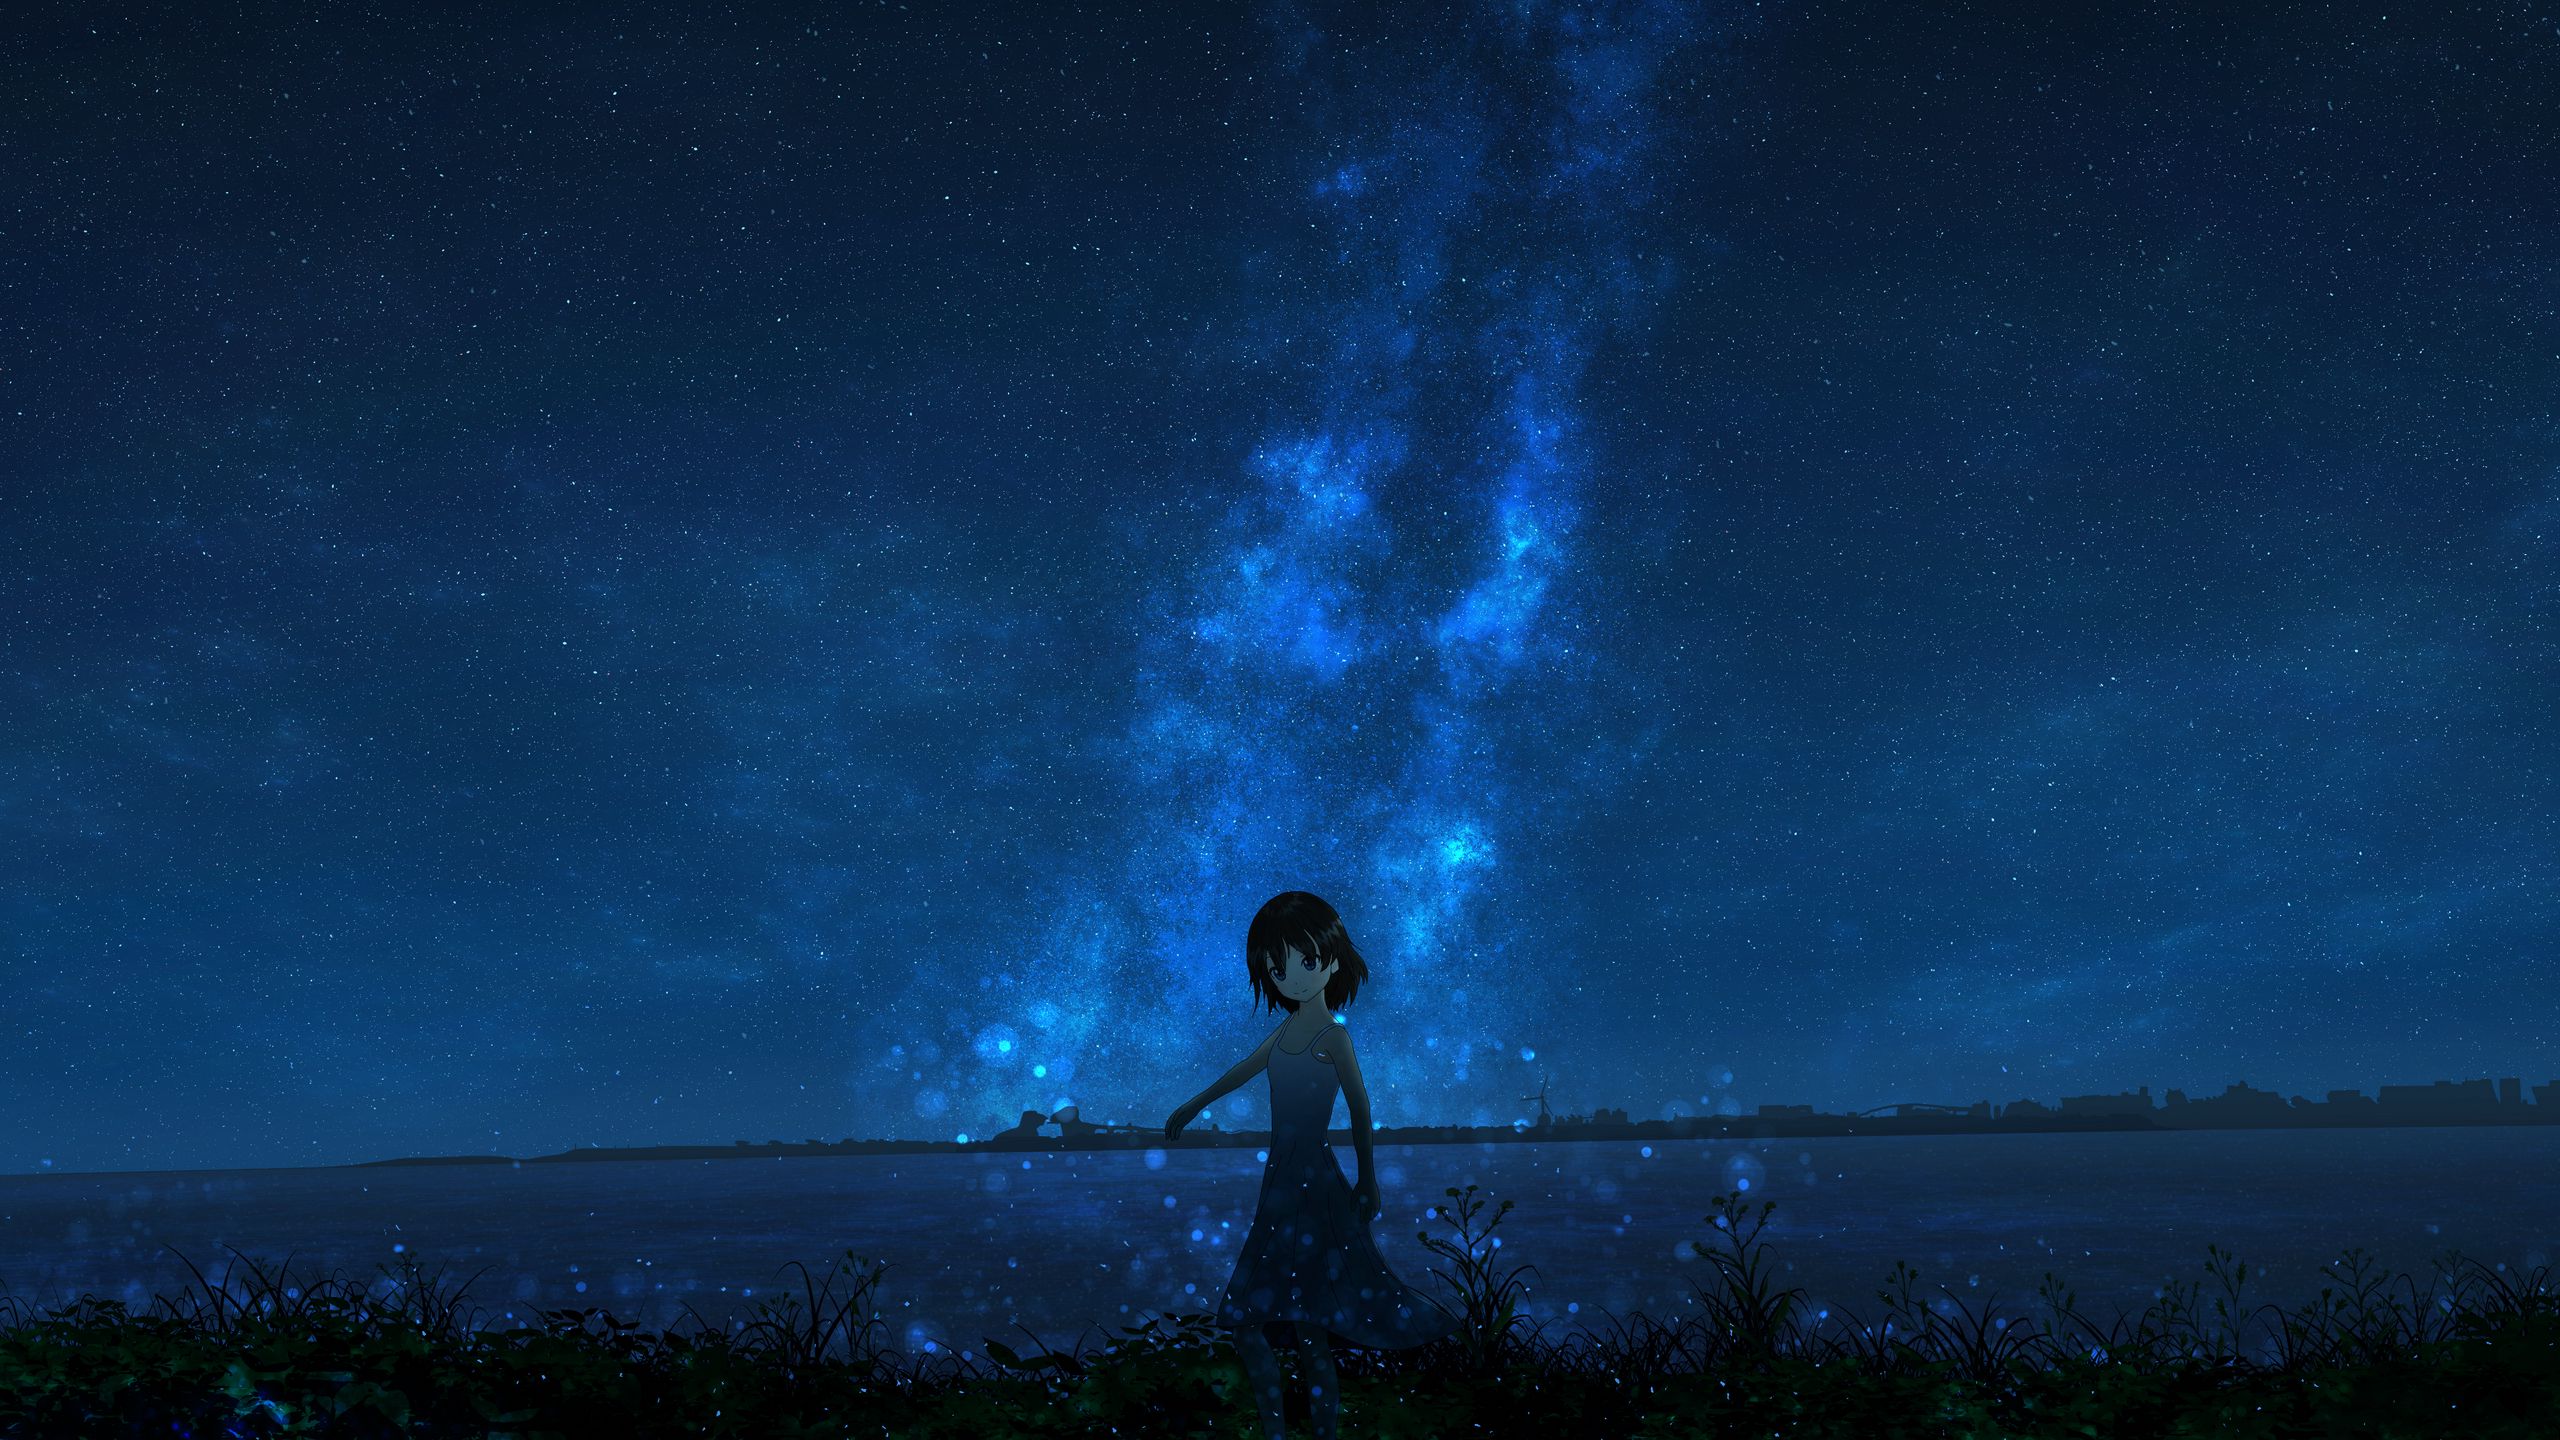 Download wallpaper 2560x1440 girl, night, starry sky, anime widescreen 16:9 HD background